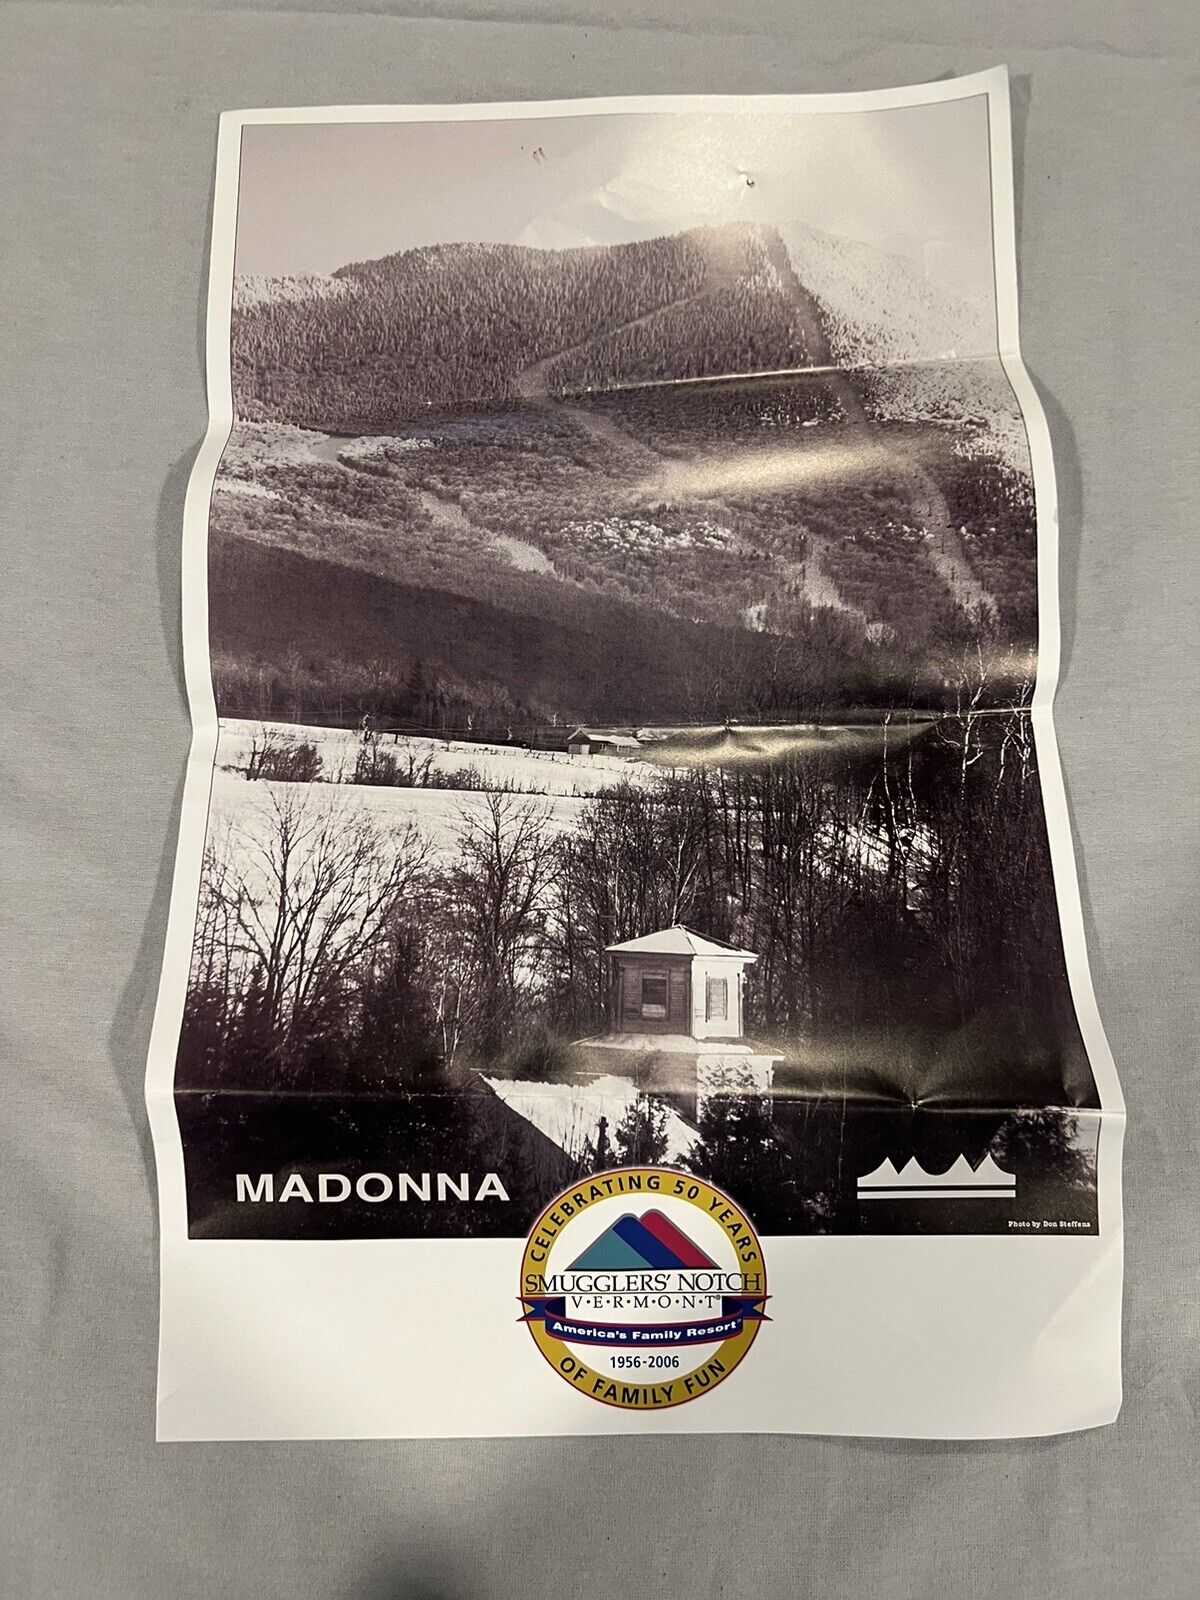 Smugglers Notch Poster Of Madonna Mountain 